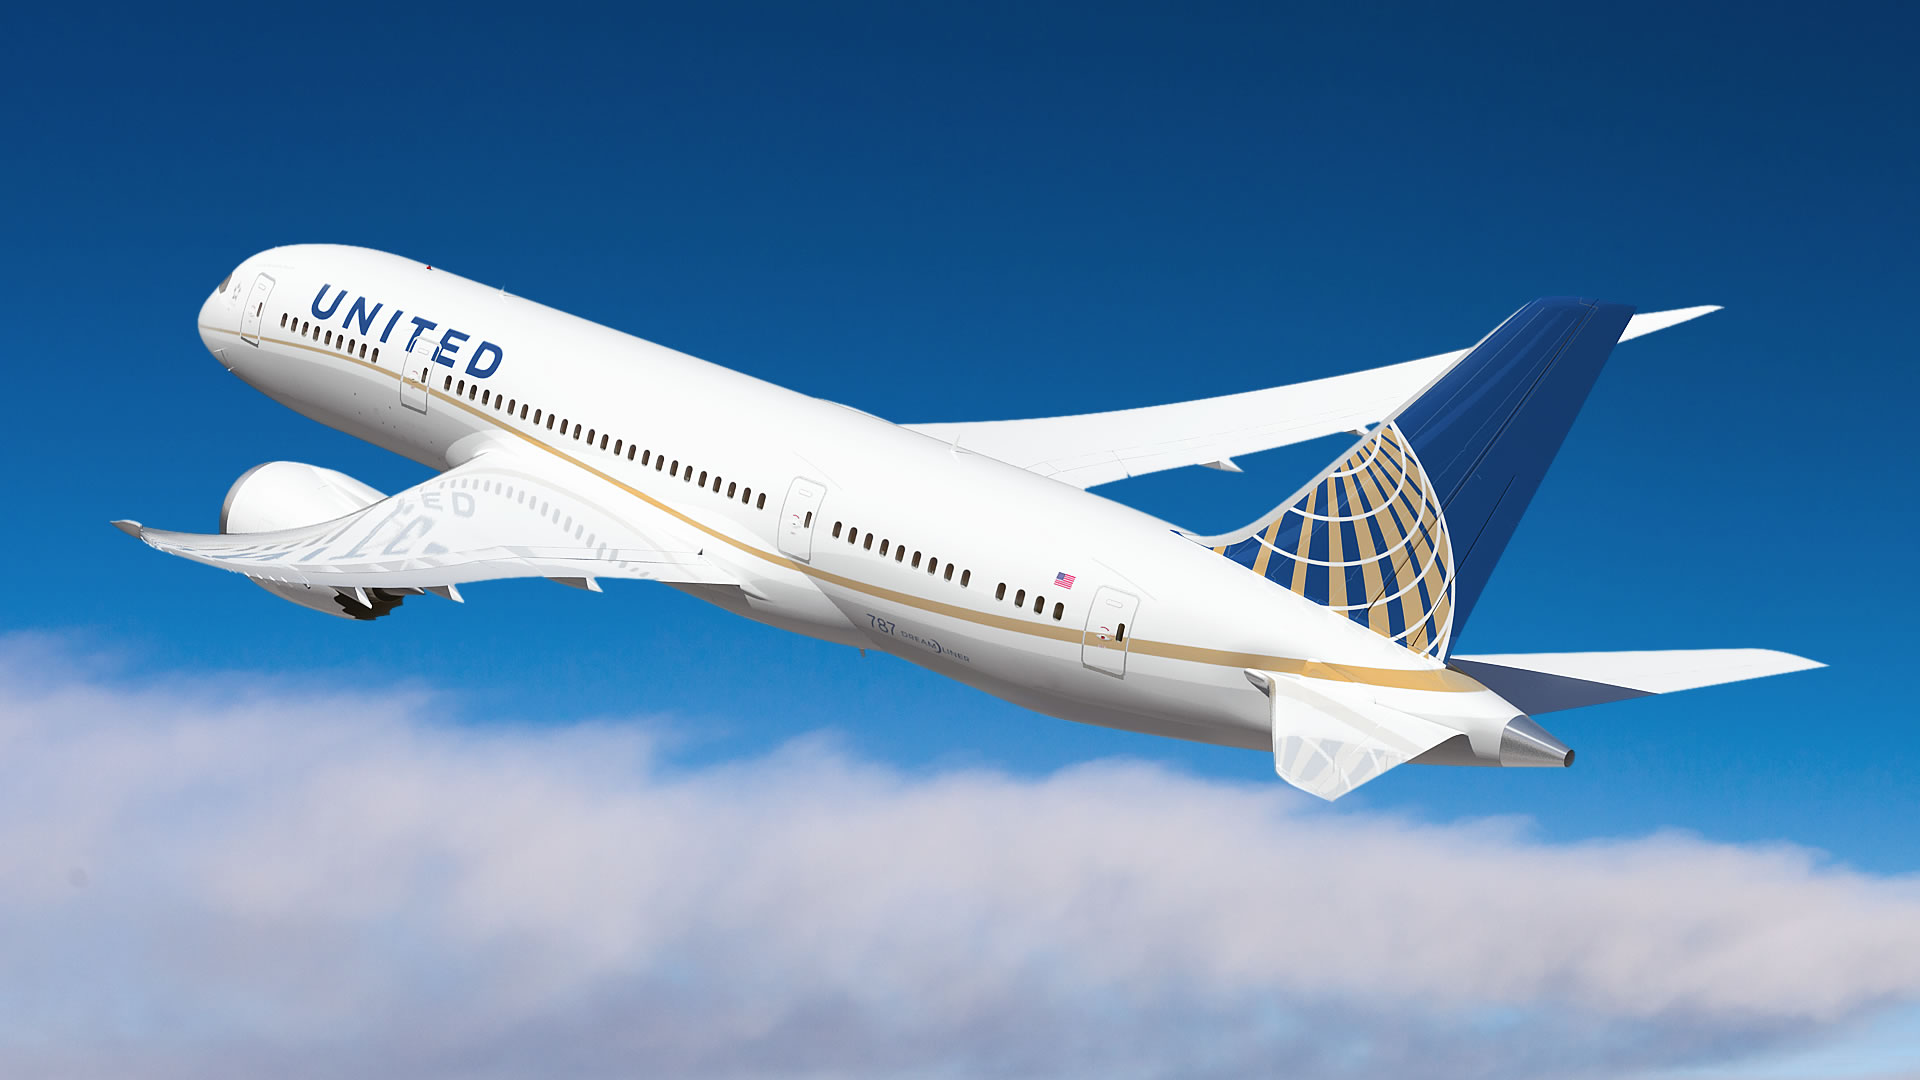 United Airlines reports full-year and fourth-quarter 2016 performance